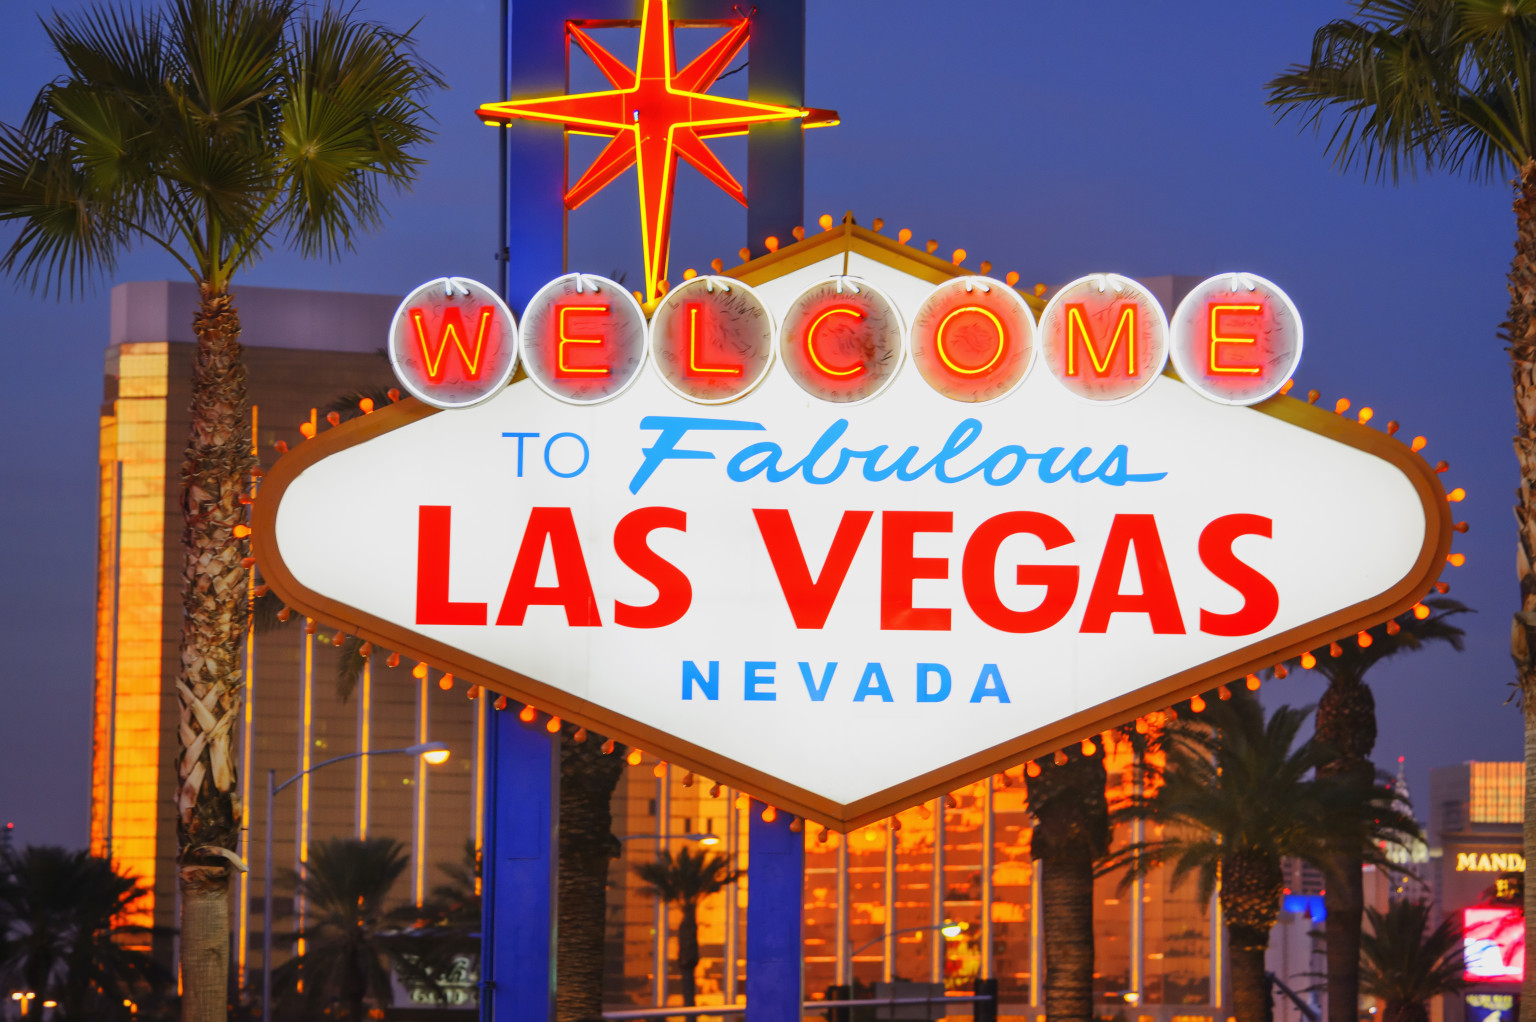 What Does Las Vegas Have in Common With Attorneys? Ben Hanuka